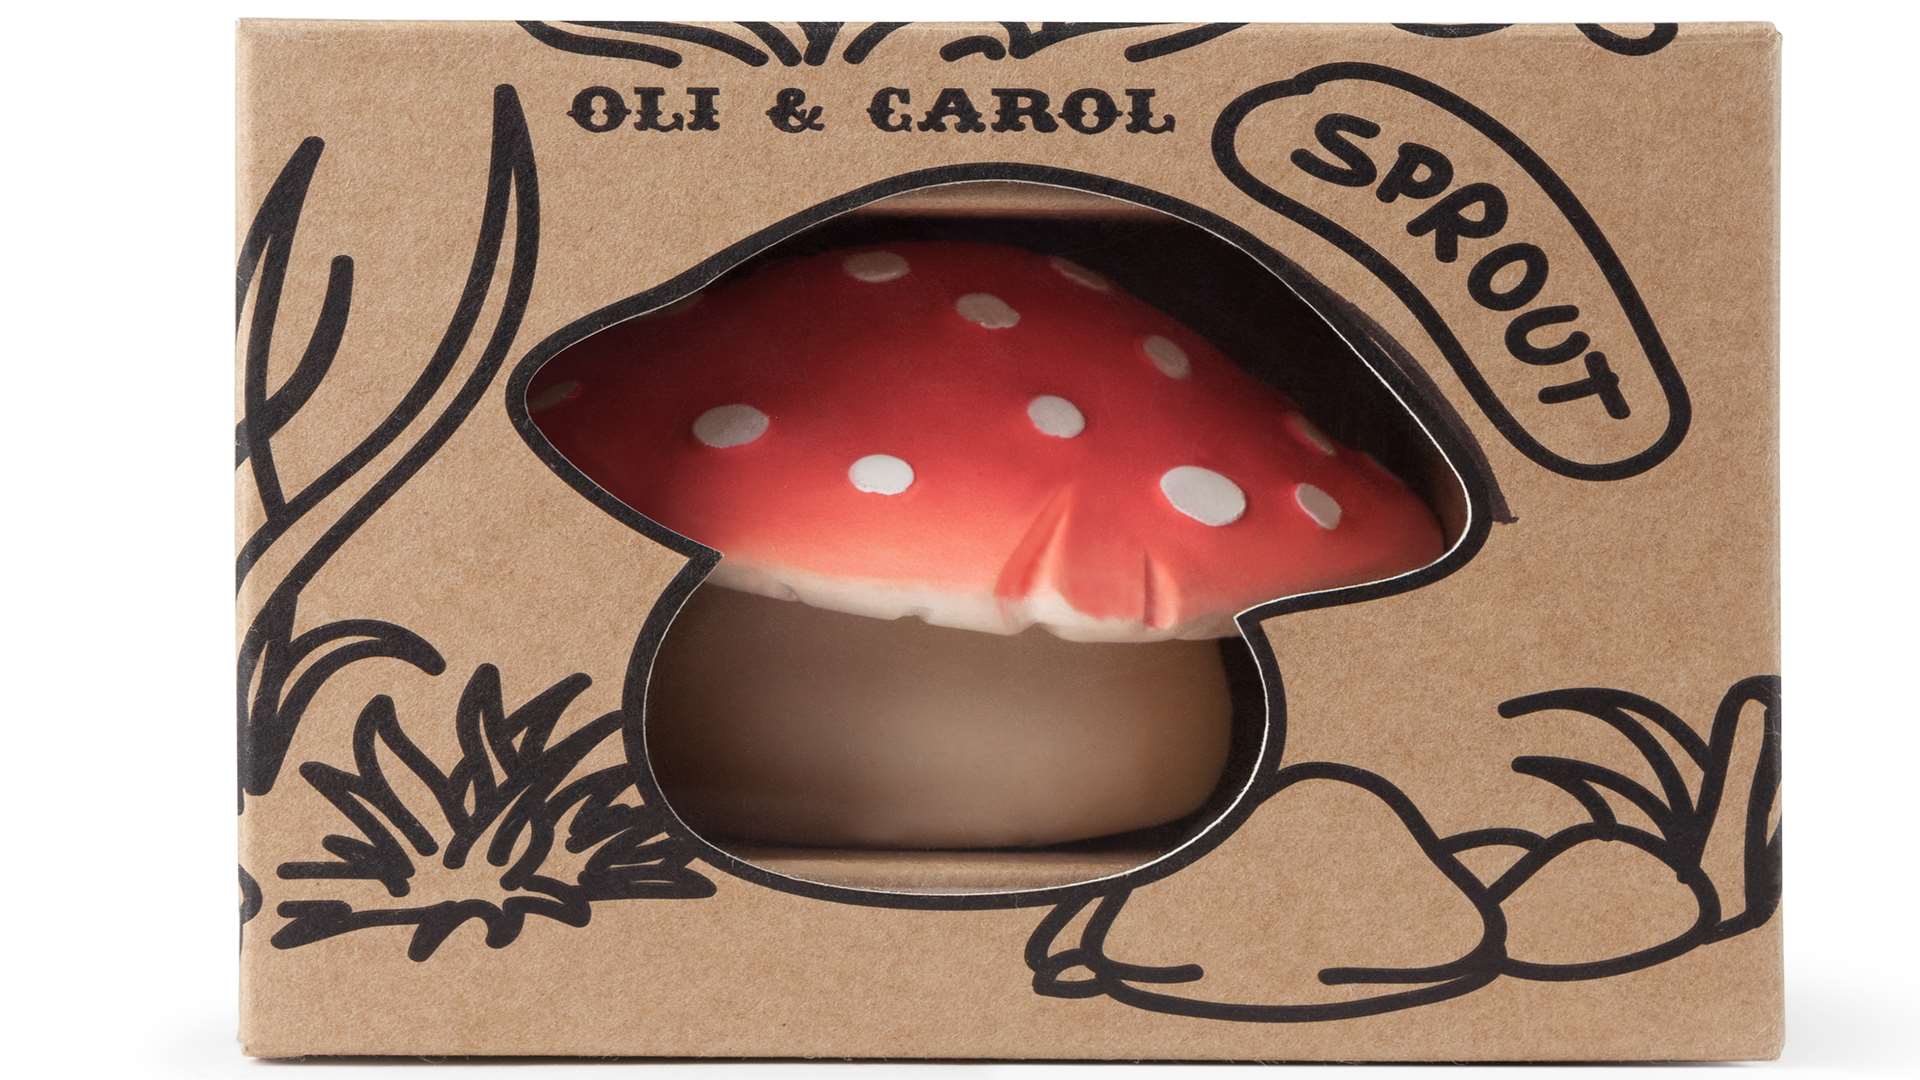 This charming and nostalgic forest toadstool is a baby toy for sensory play, chewing and bath time. It costs £10.95 at littlebabycompany.com